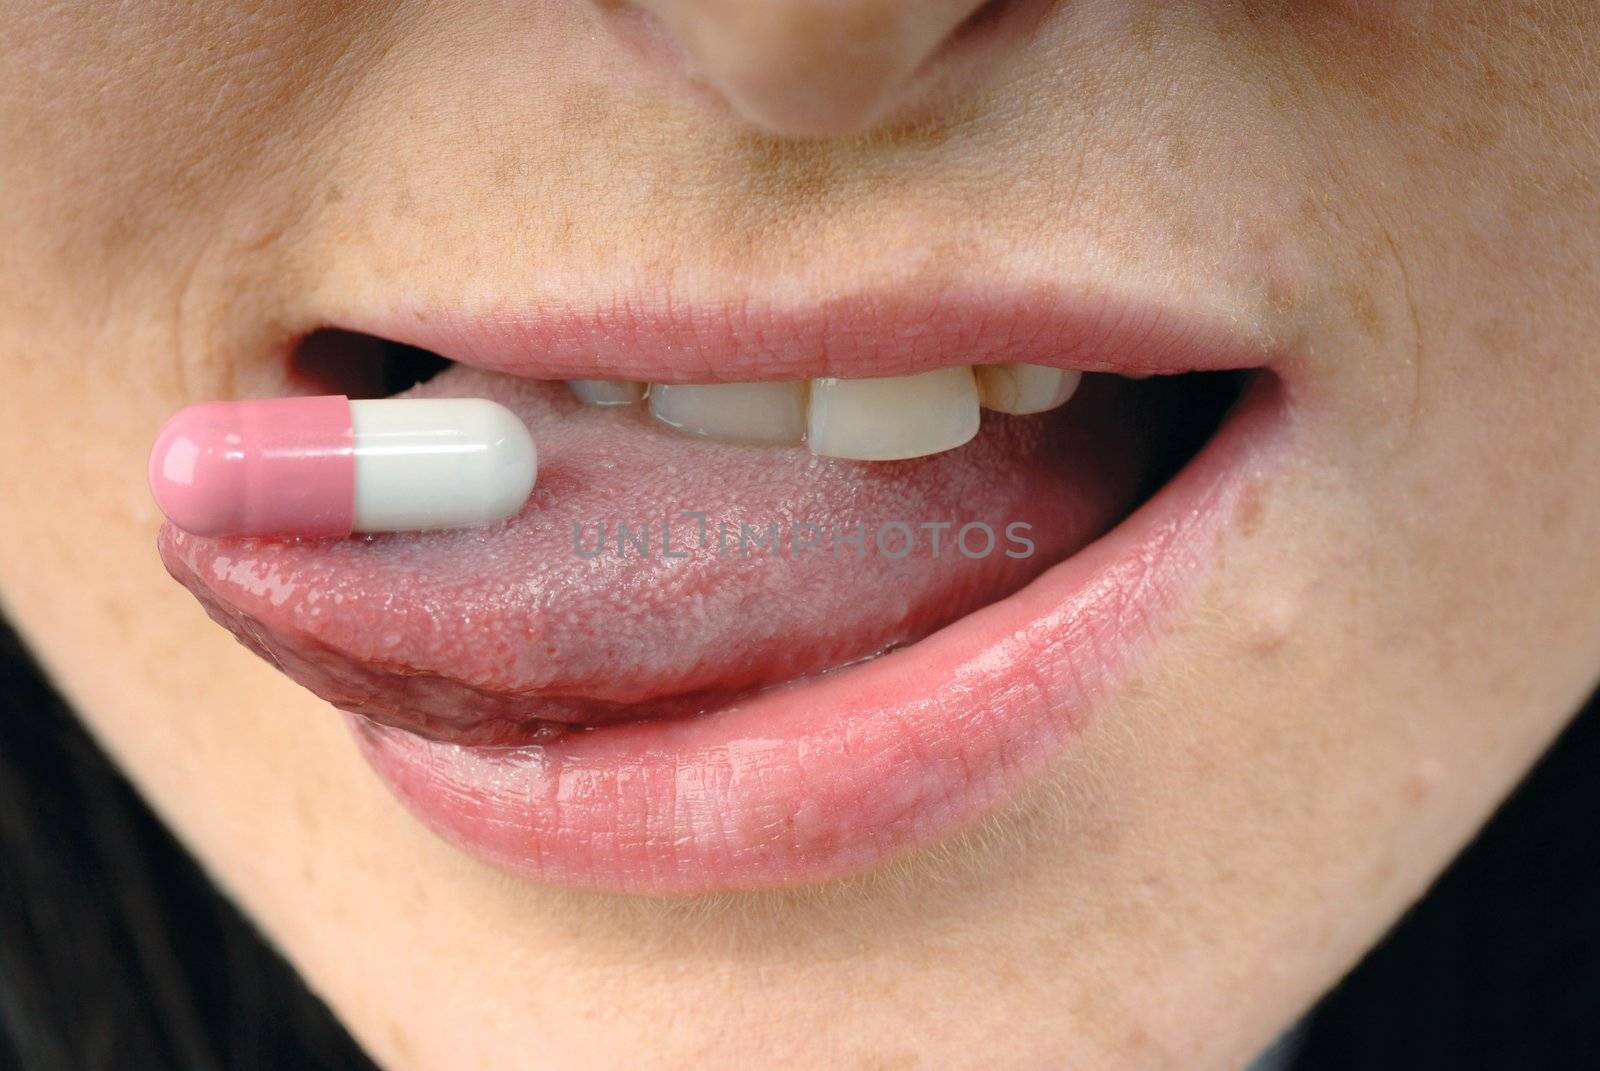 Young woman's face with pink pill